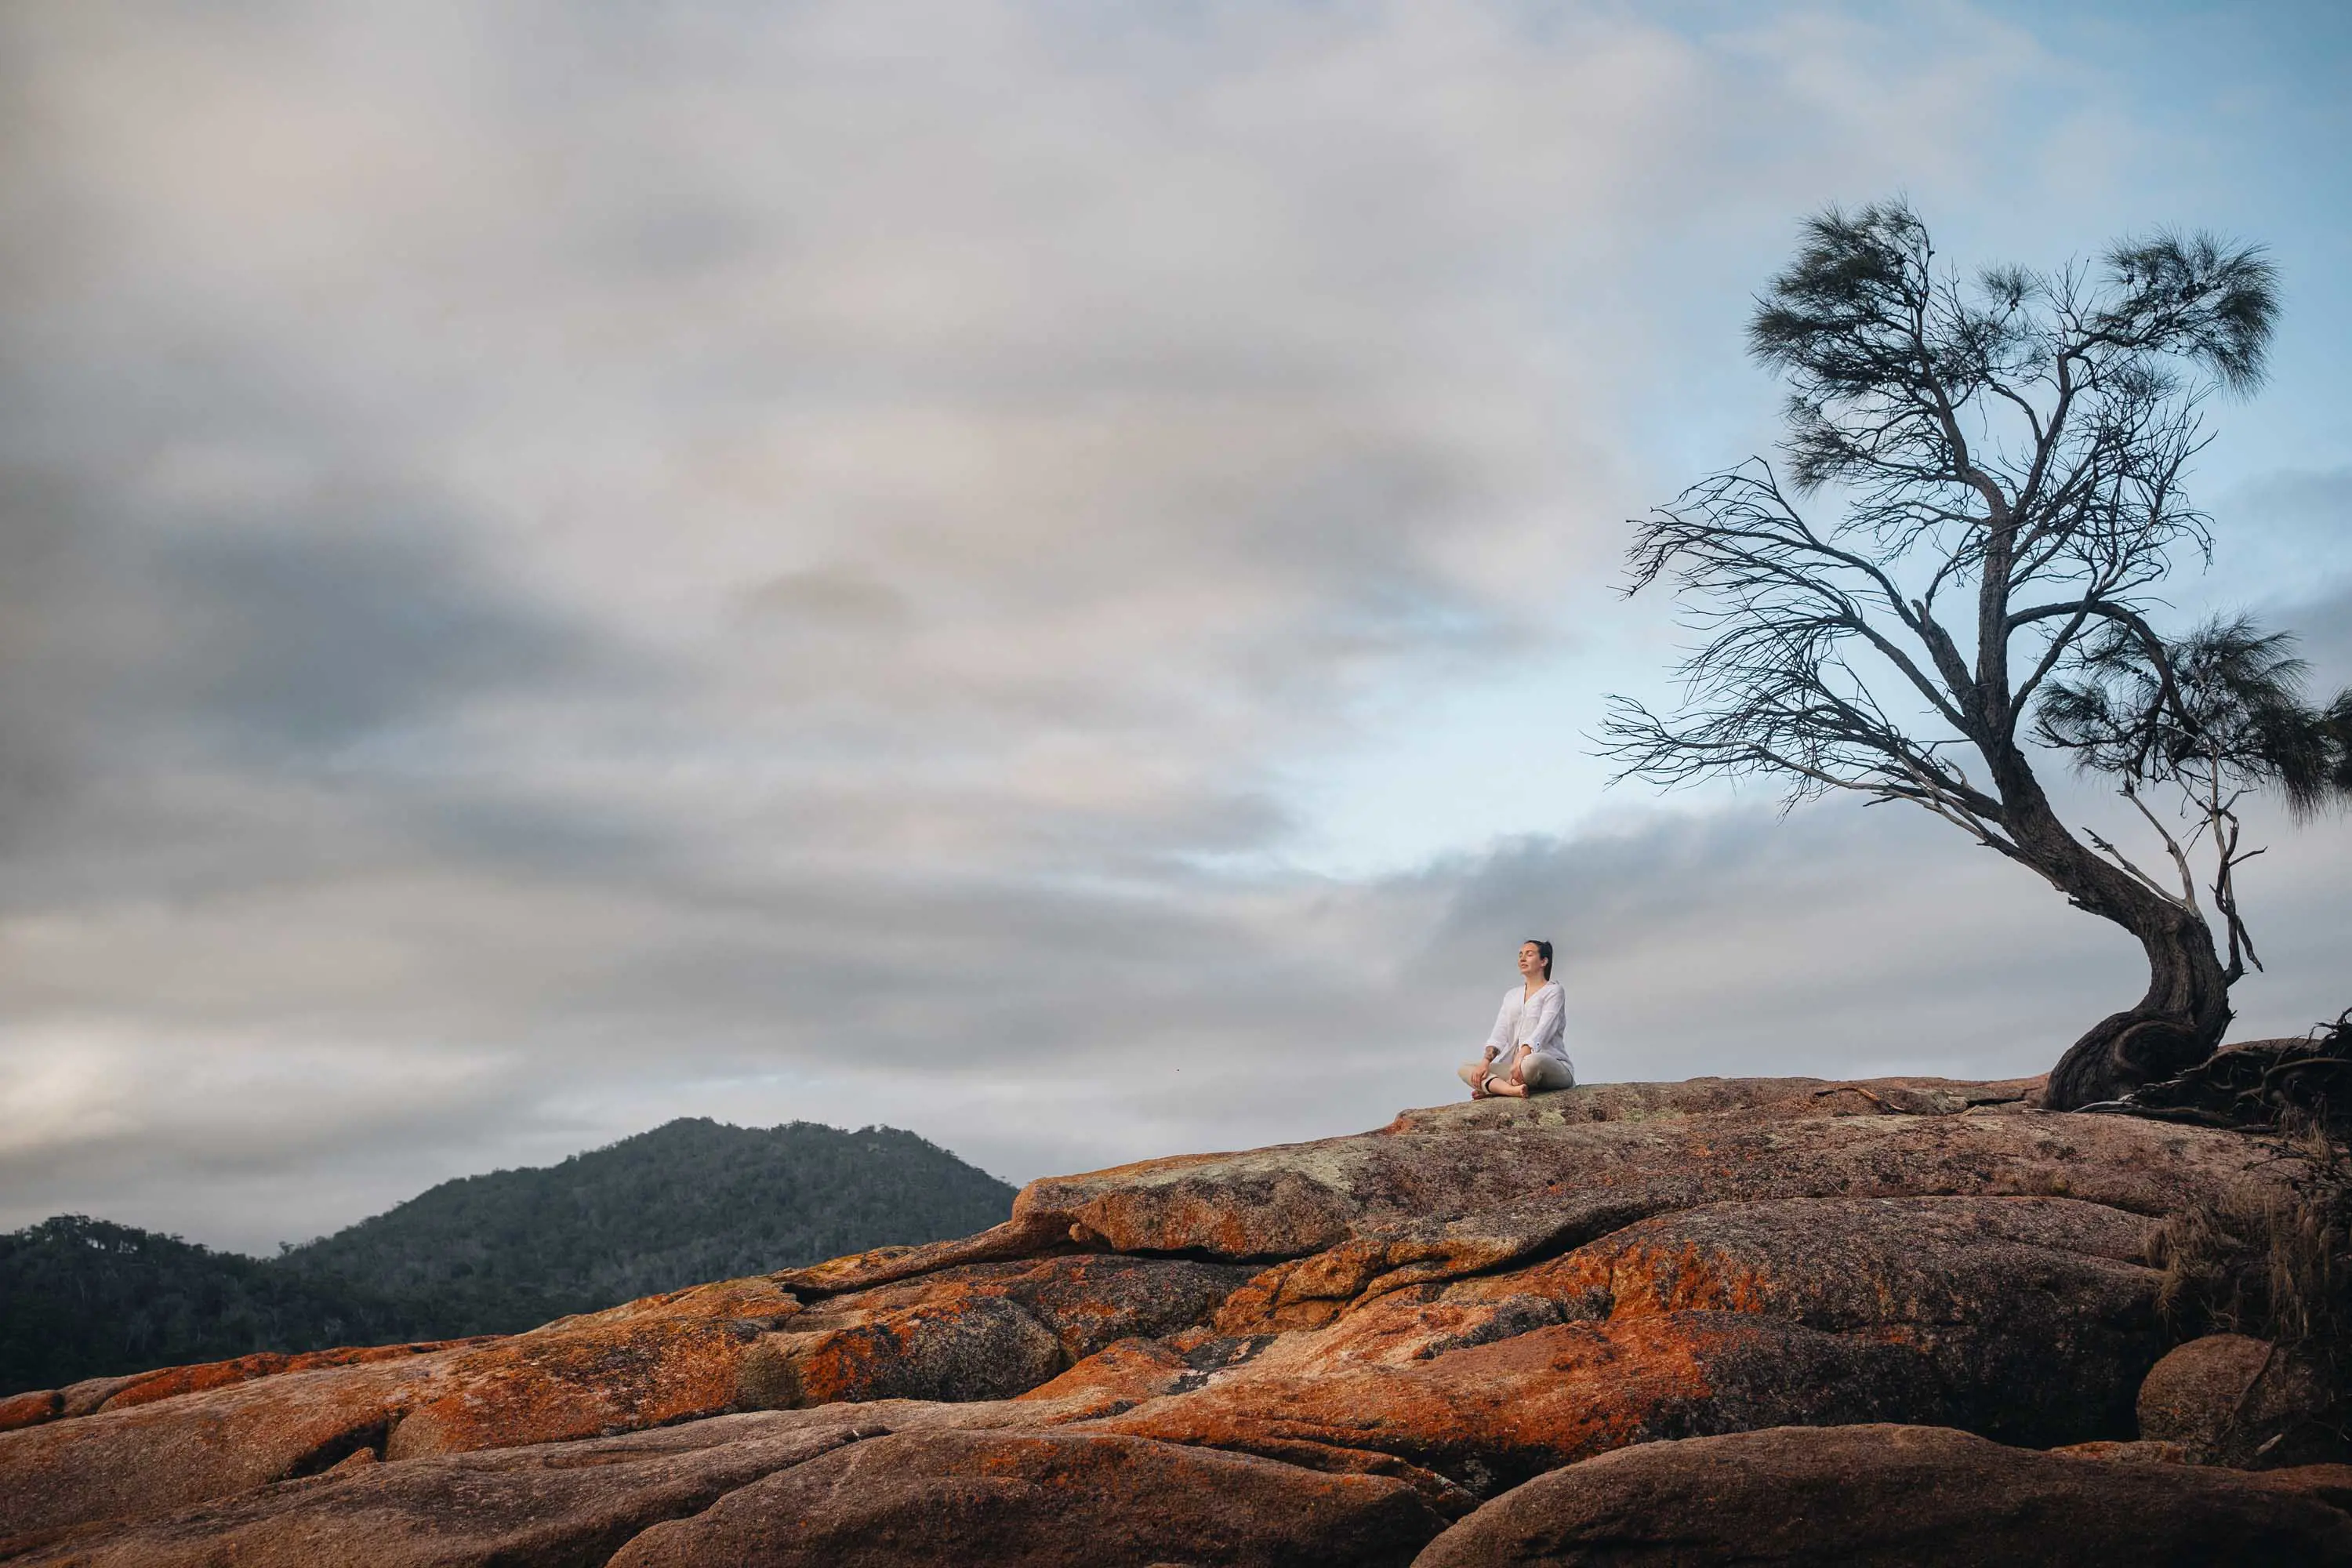 A woman wearing a white shirt sits on top of a large orange rock with a tree in the background.